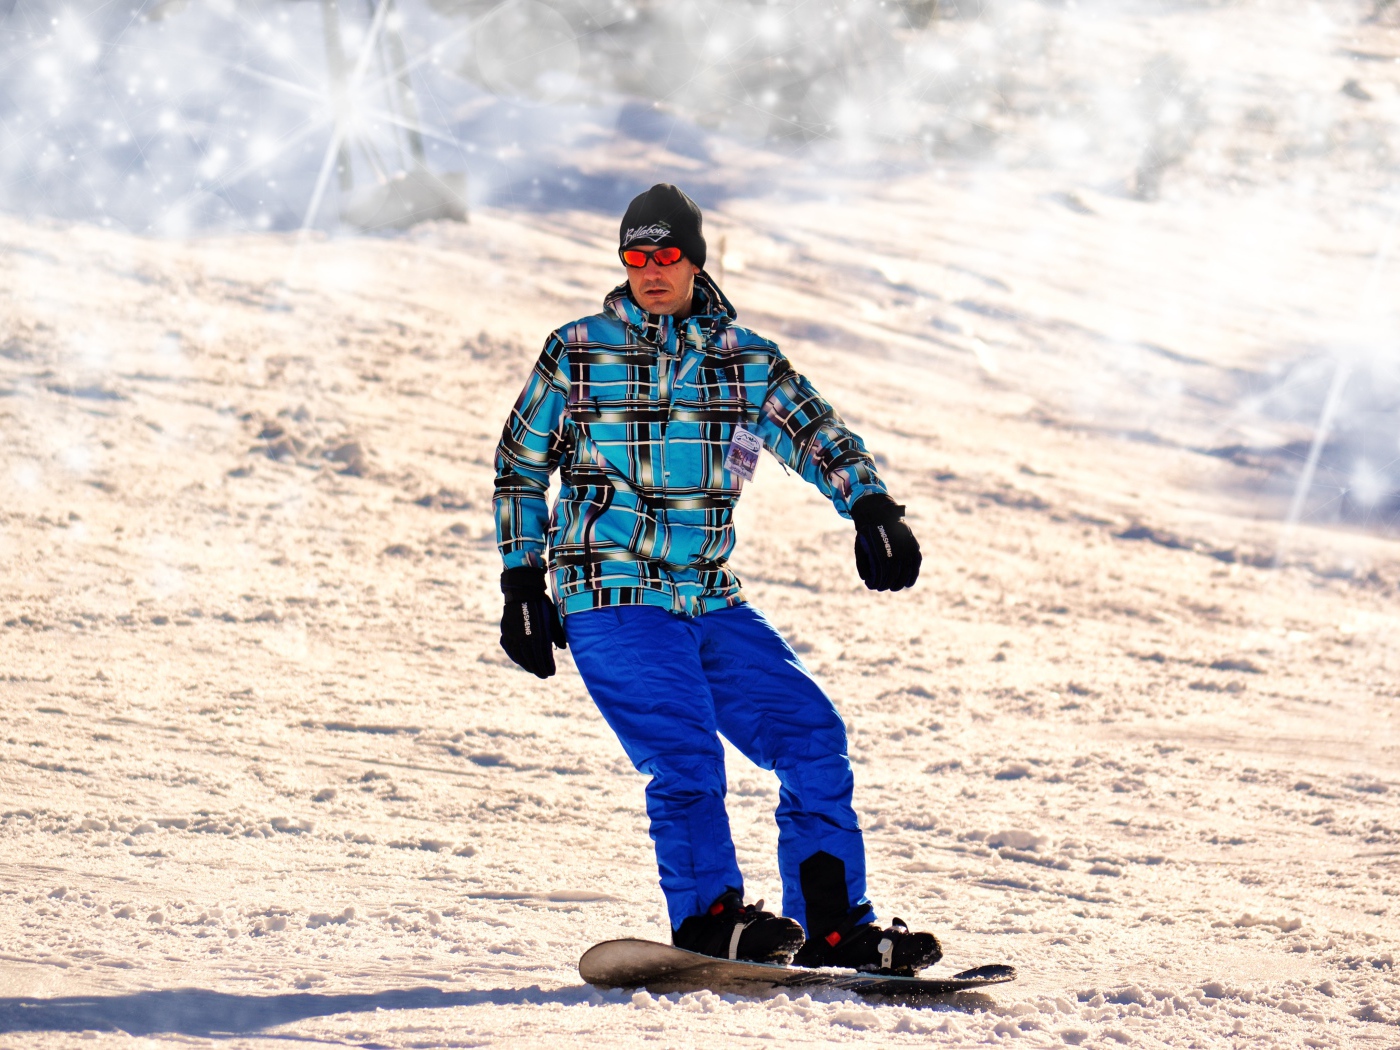 A man snowboarder drives down the mountain